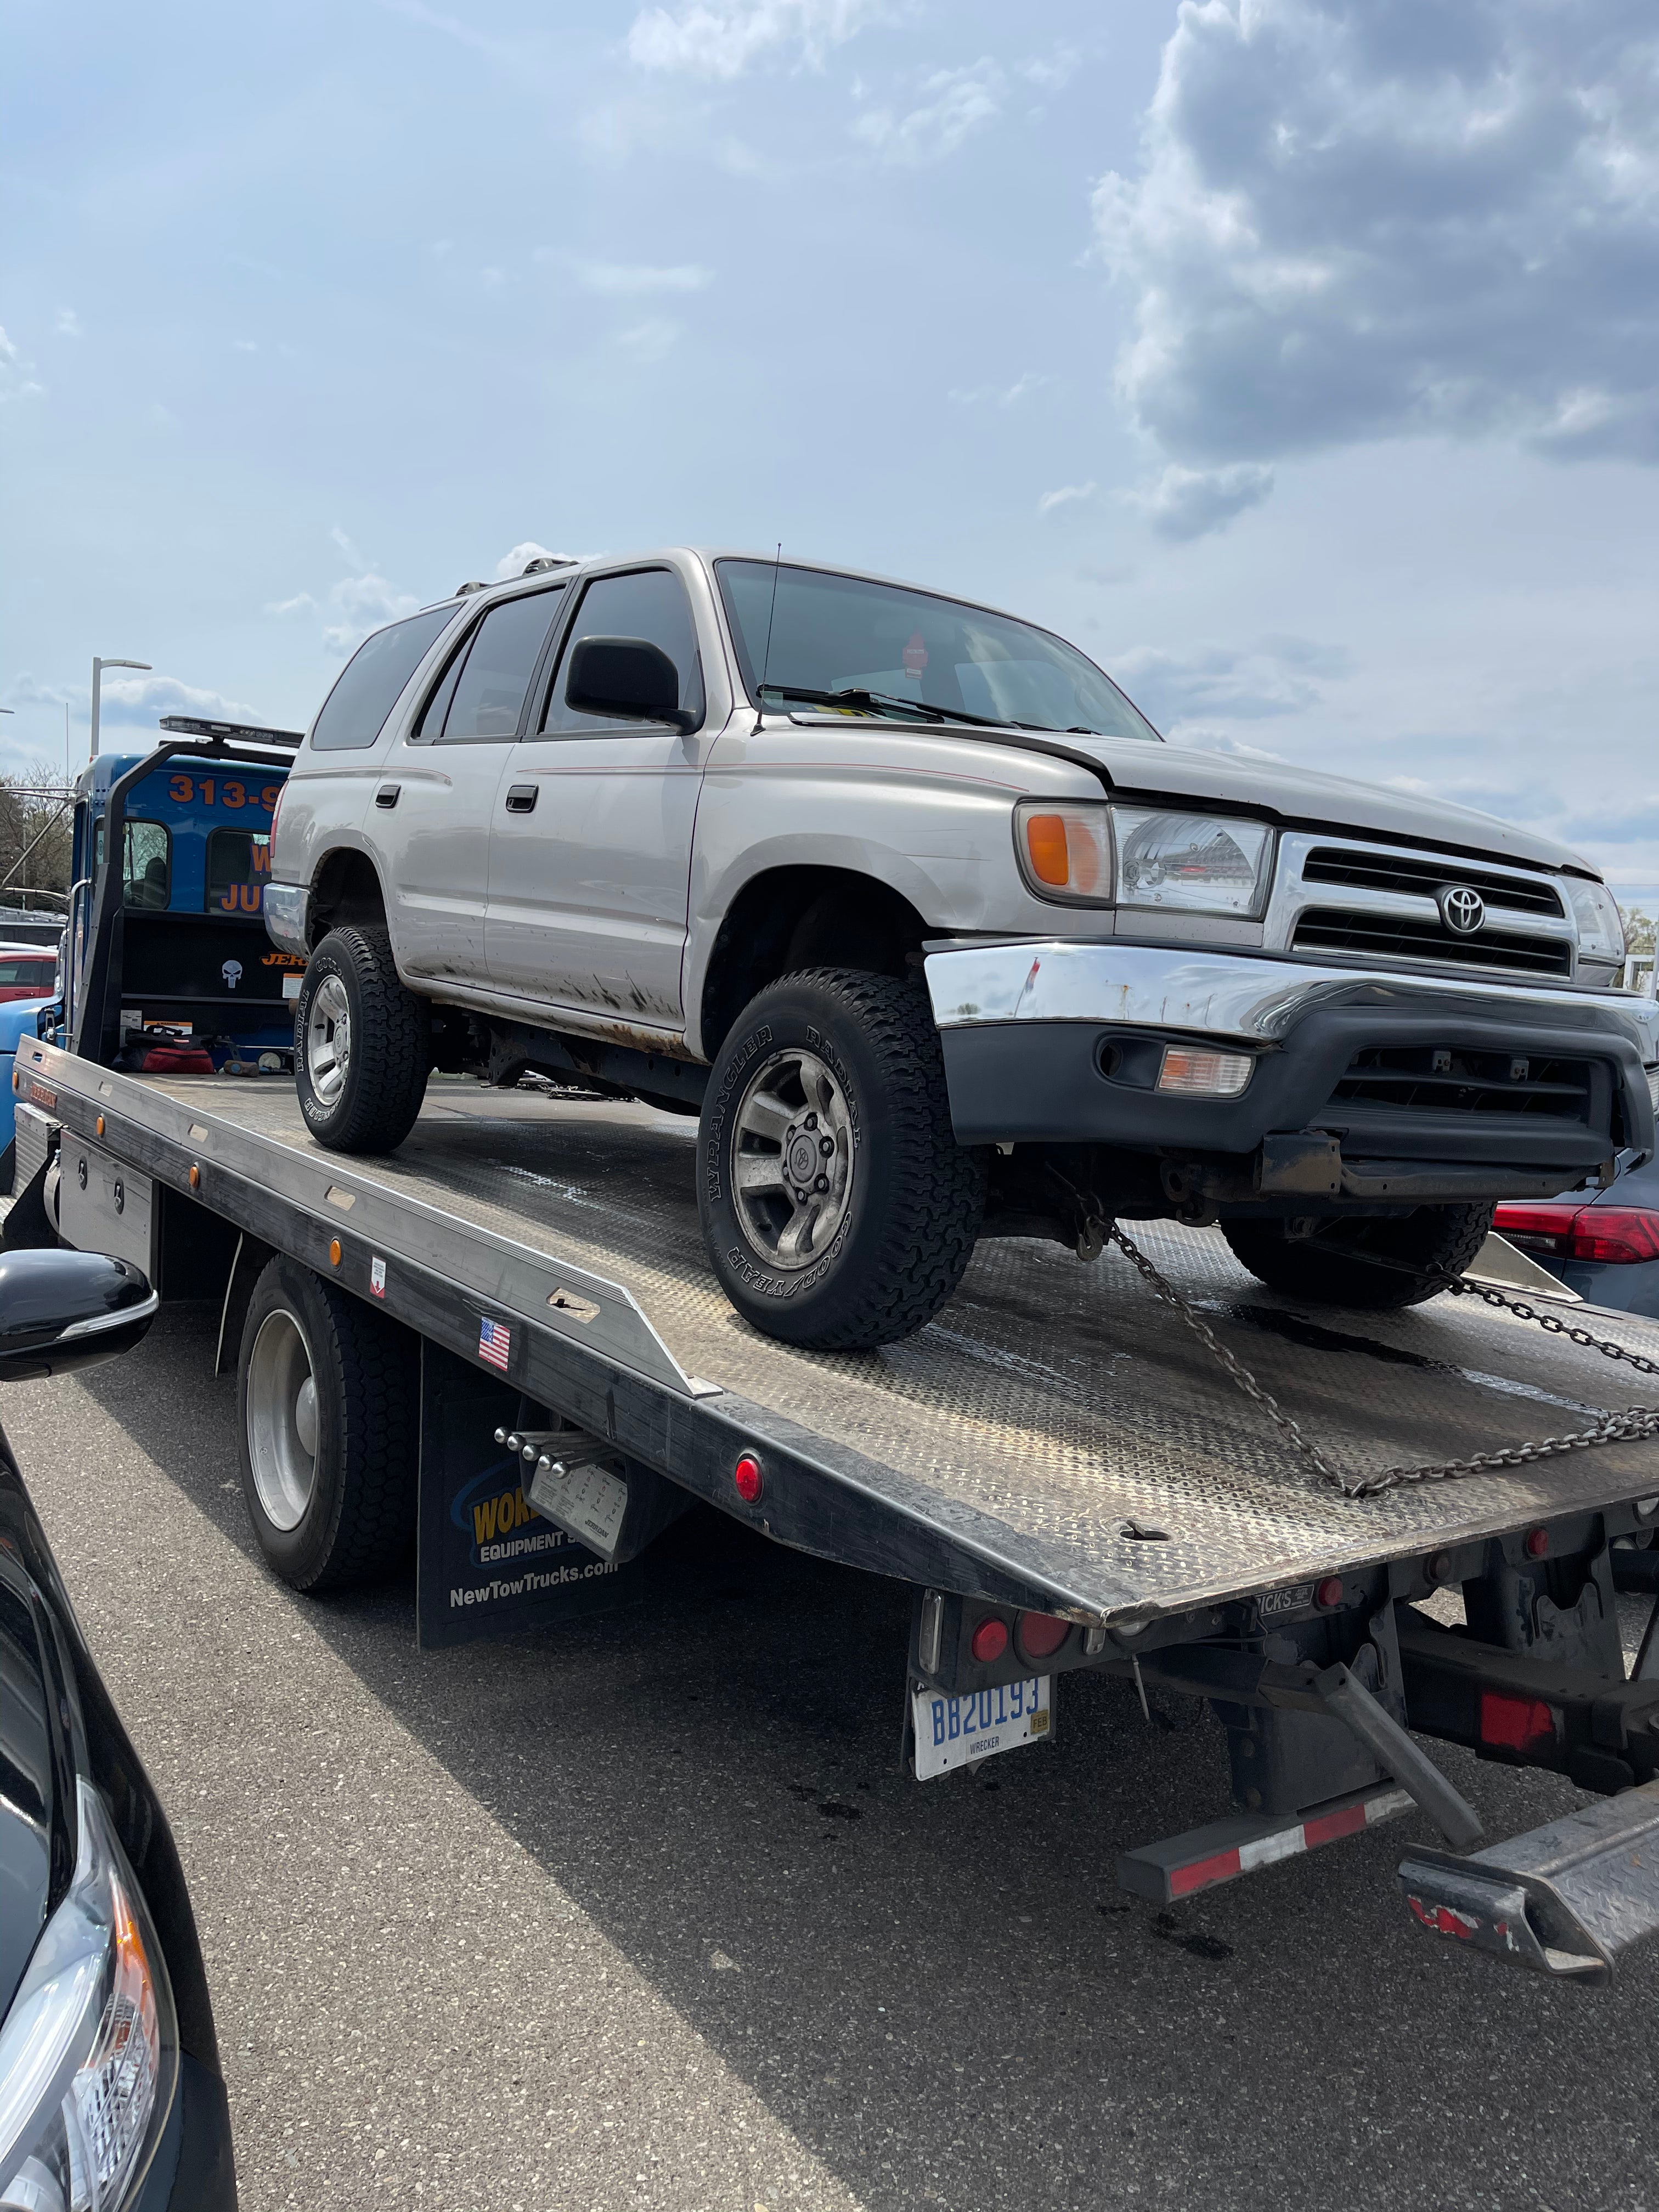 Toyota car on towing truck